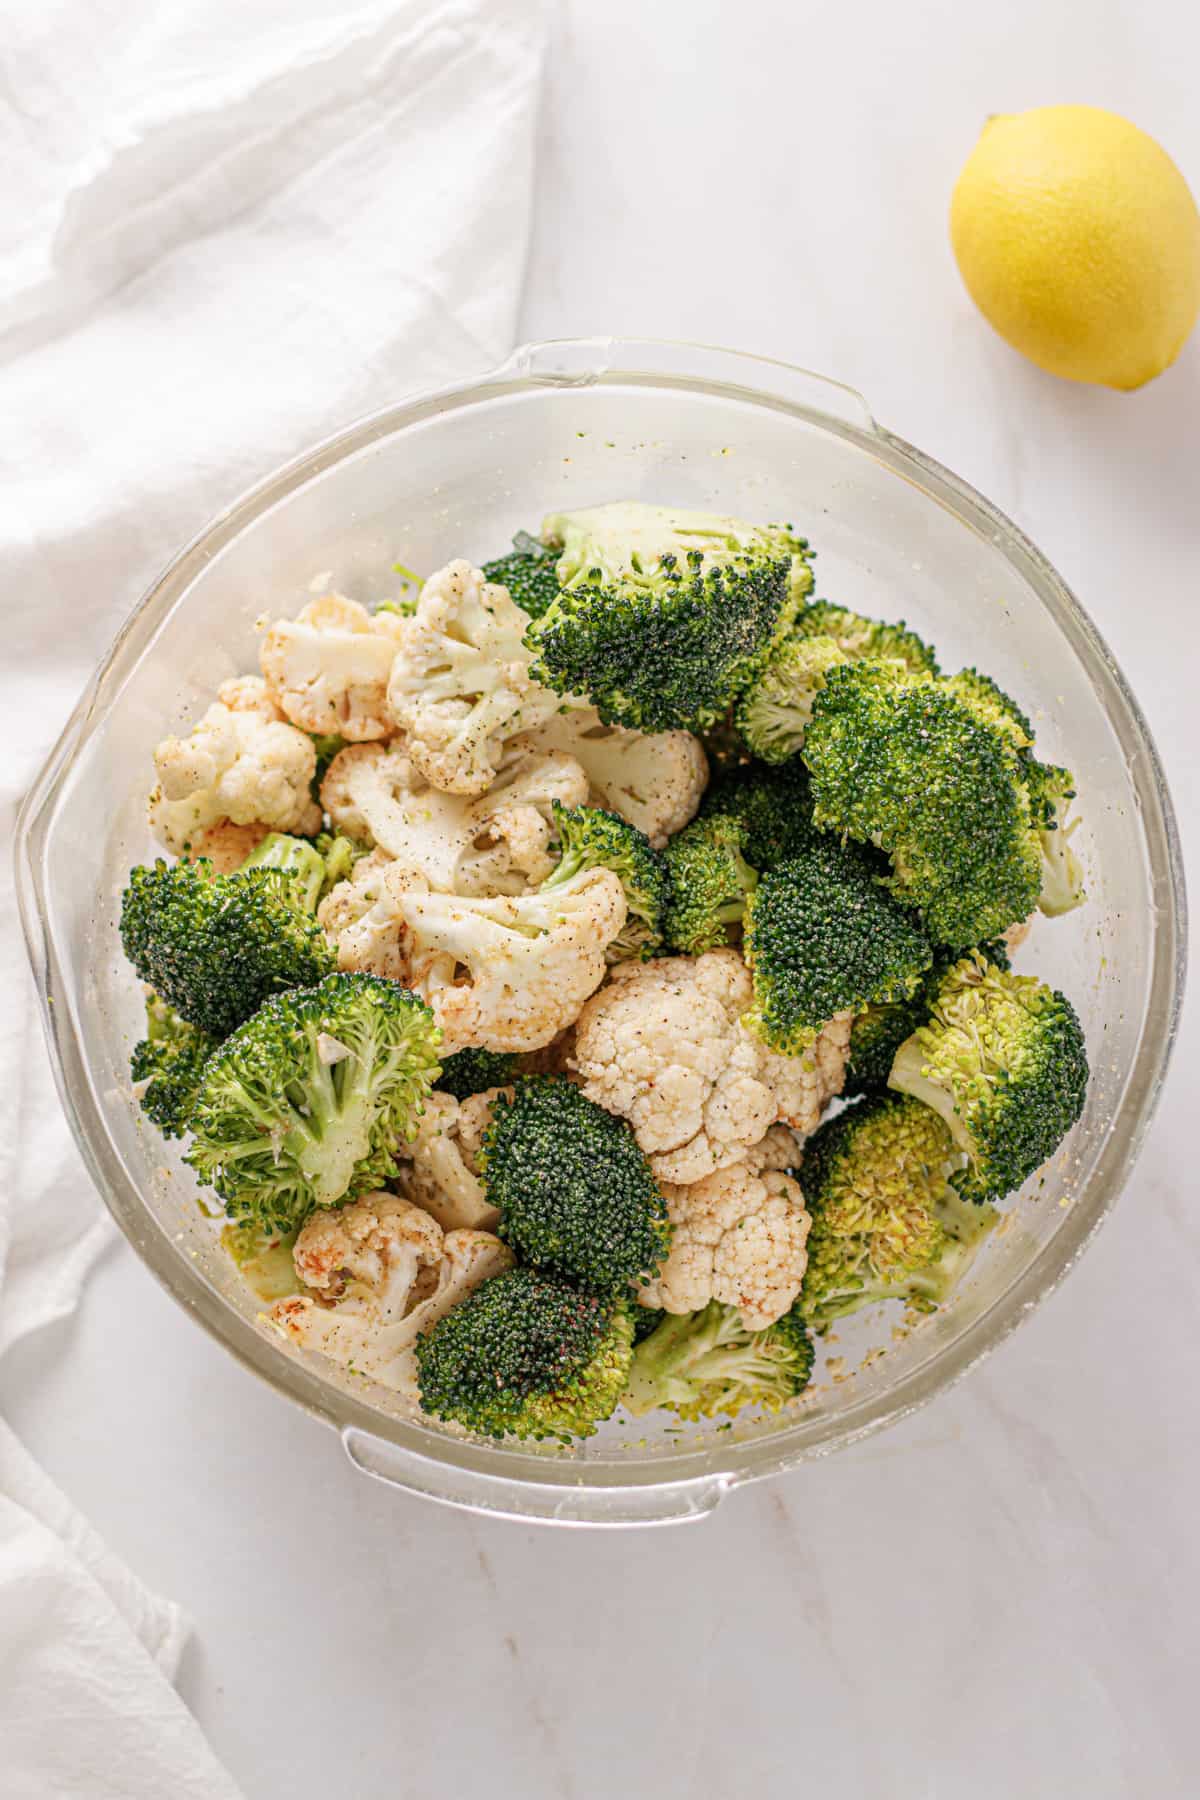 Broccoli and cauliflower mixed with oil and seasonings.